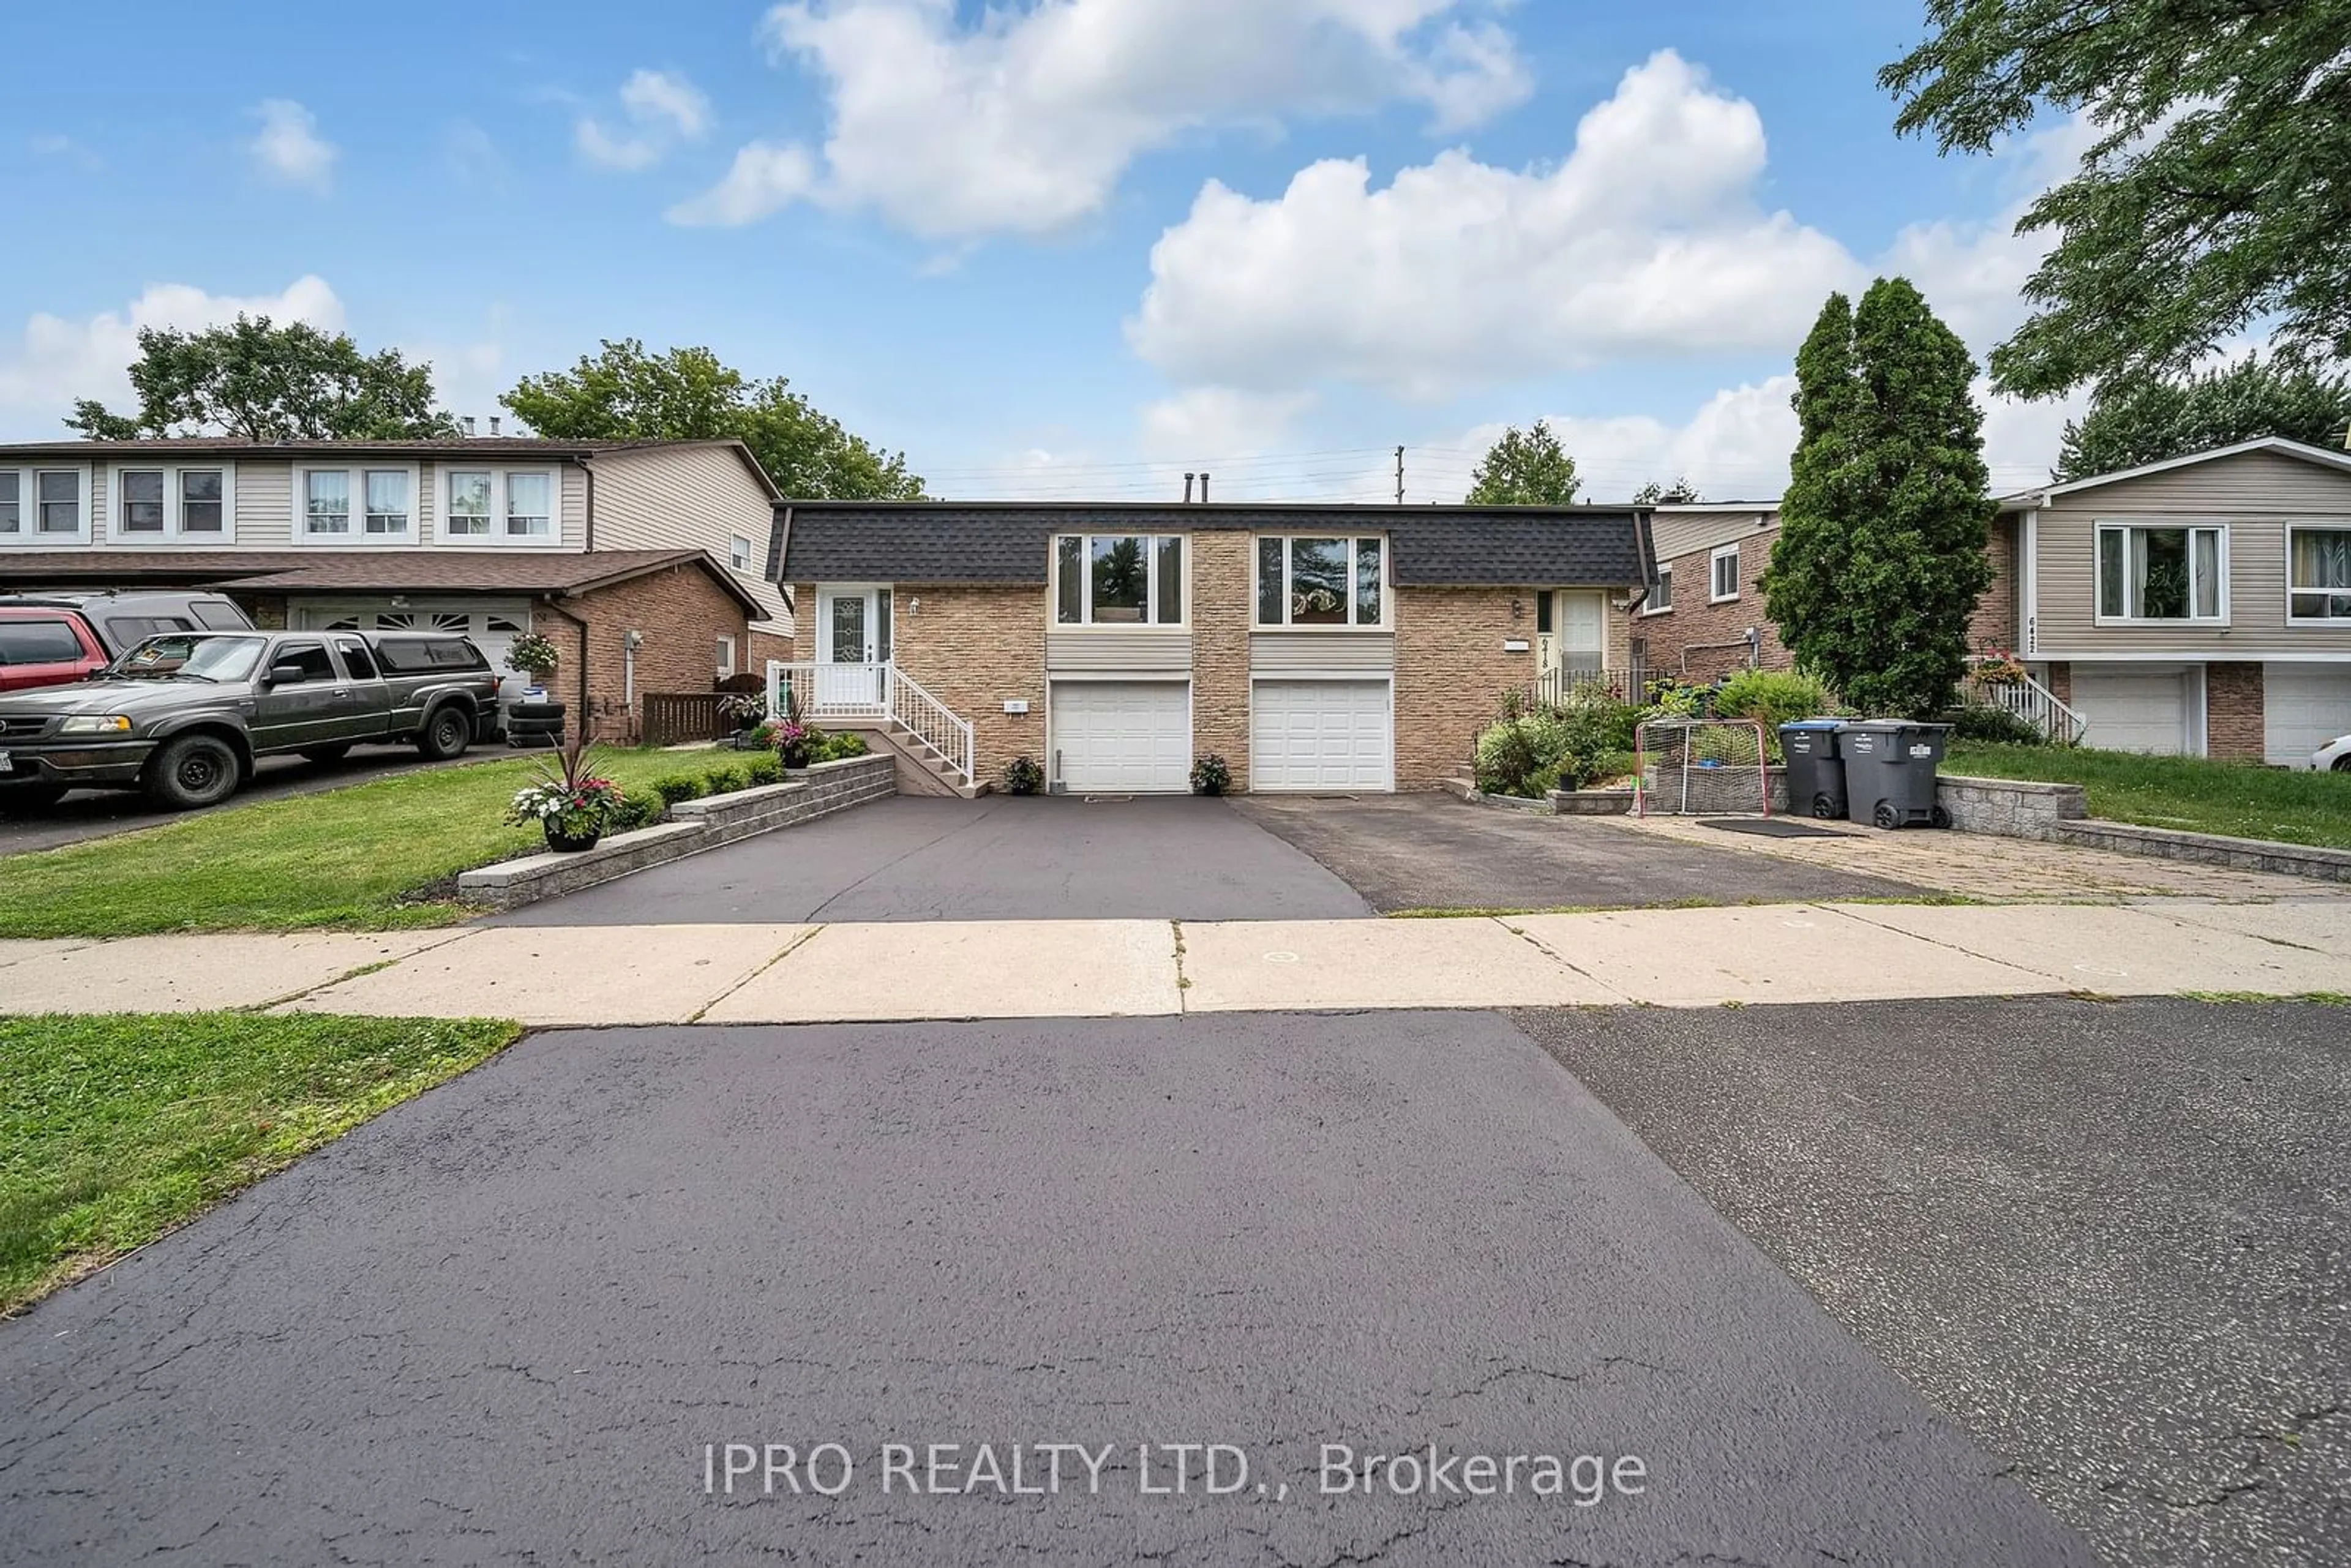 Frontside or backside of a home for 6416 Chaumont Cres, Mississauga Ontario L5N 2M8